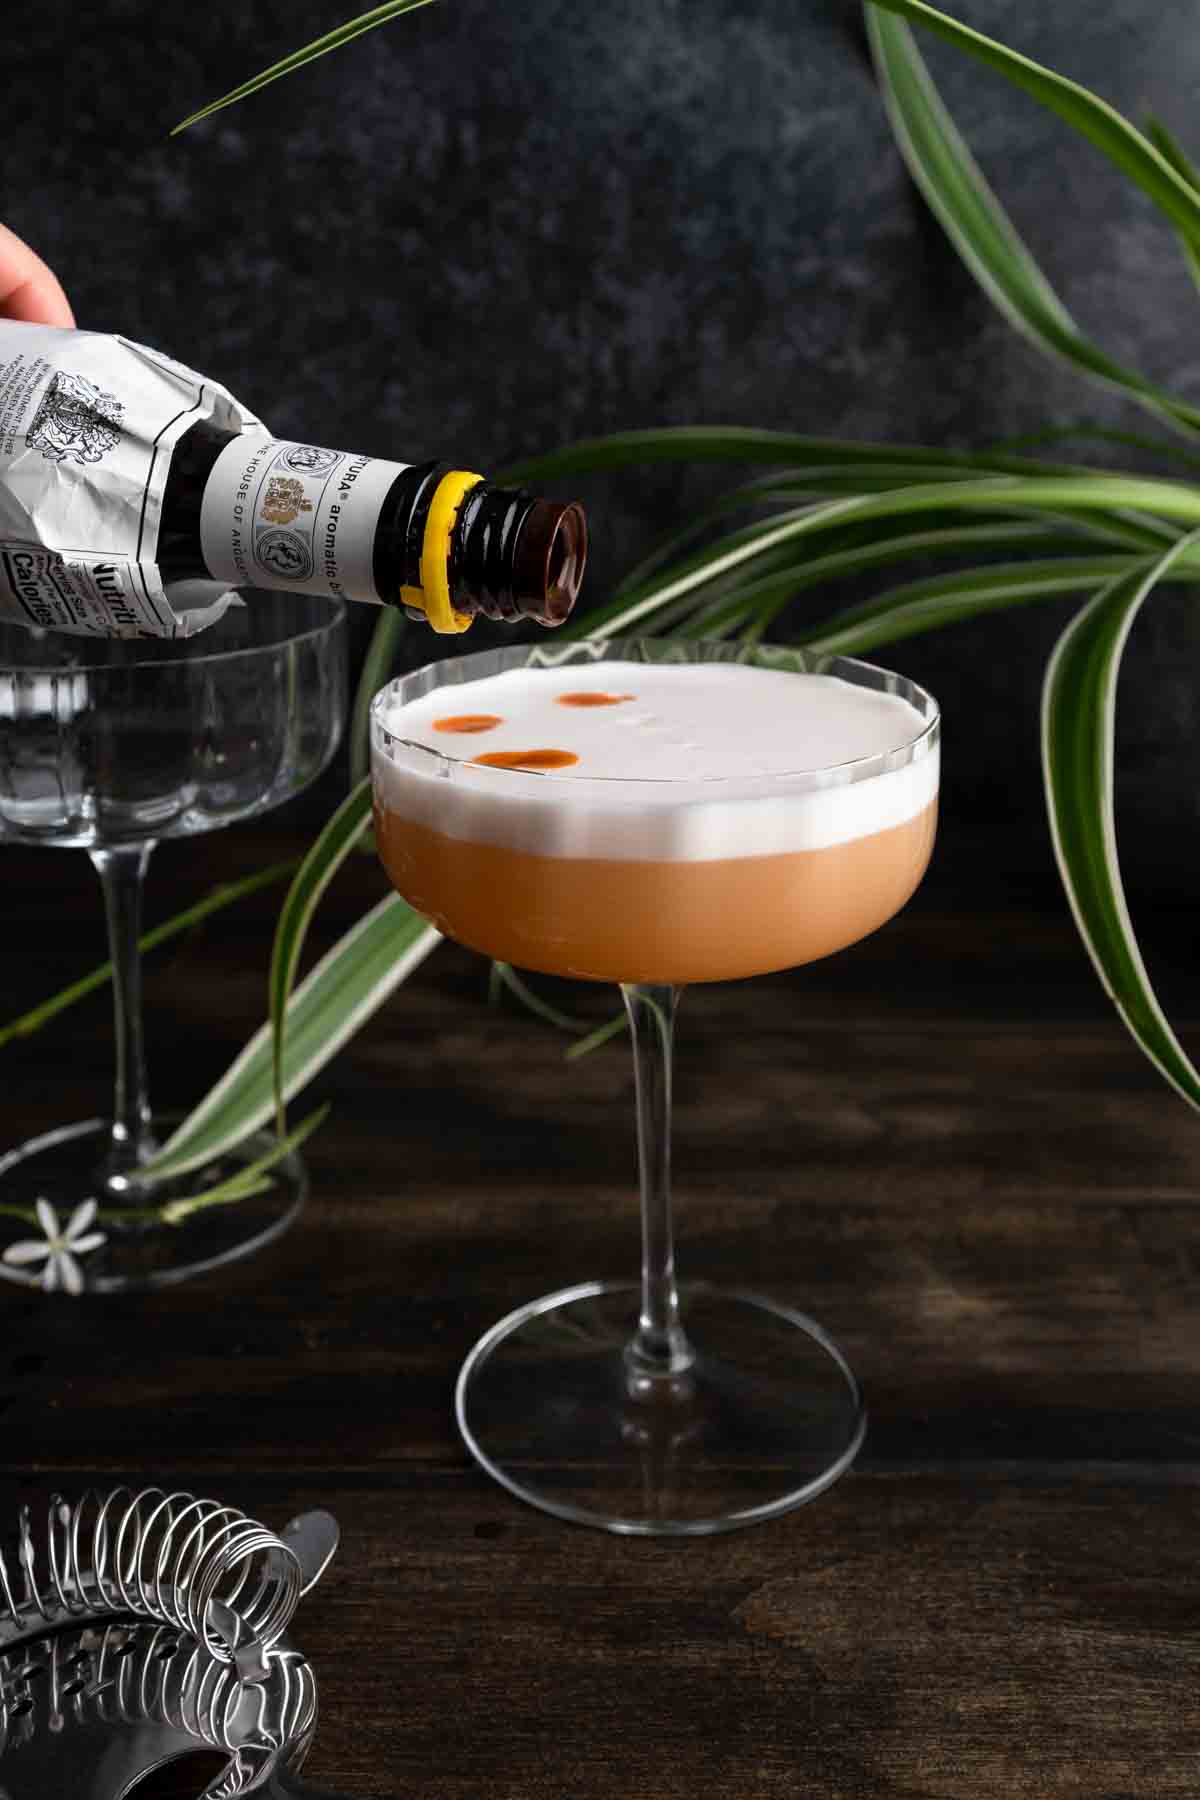 Dashing droplets of Angostura bitters on the frothy egg white layer of a sour cocktail.